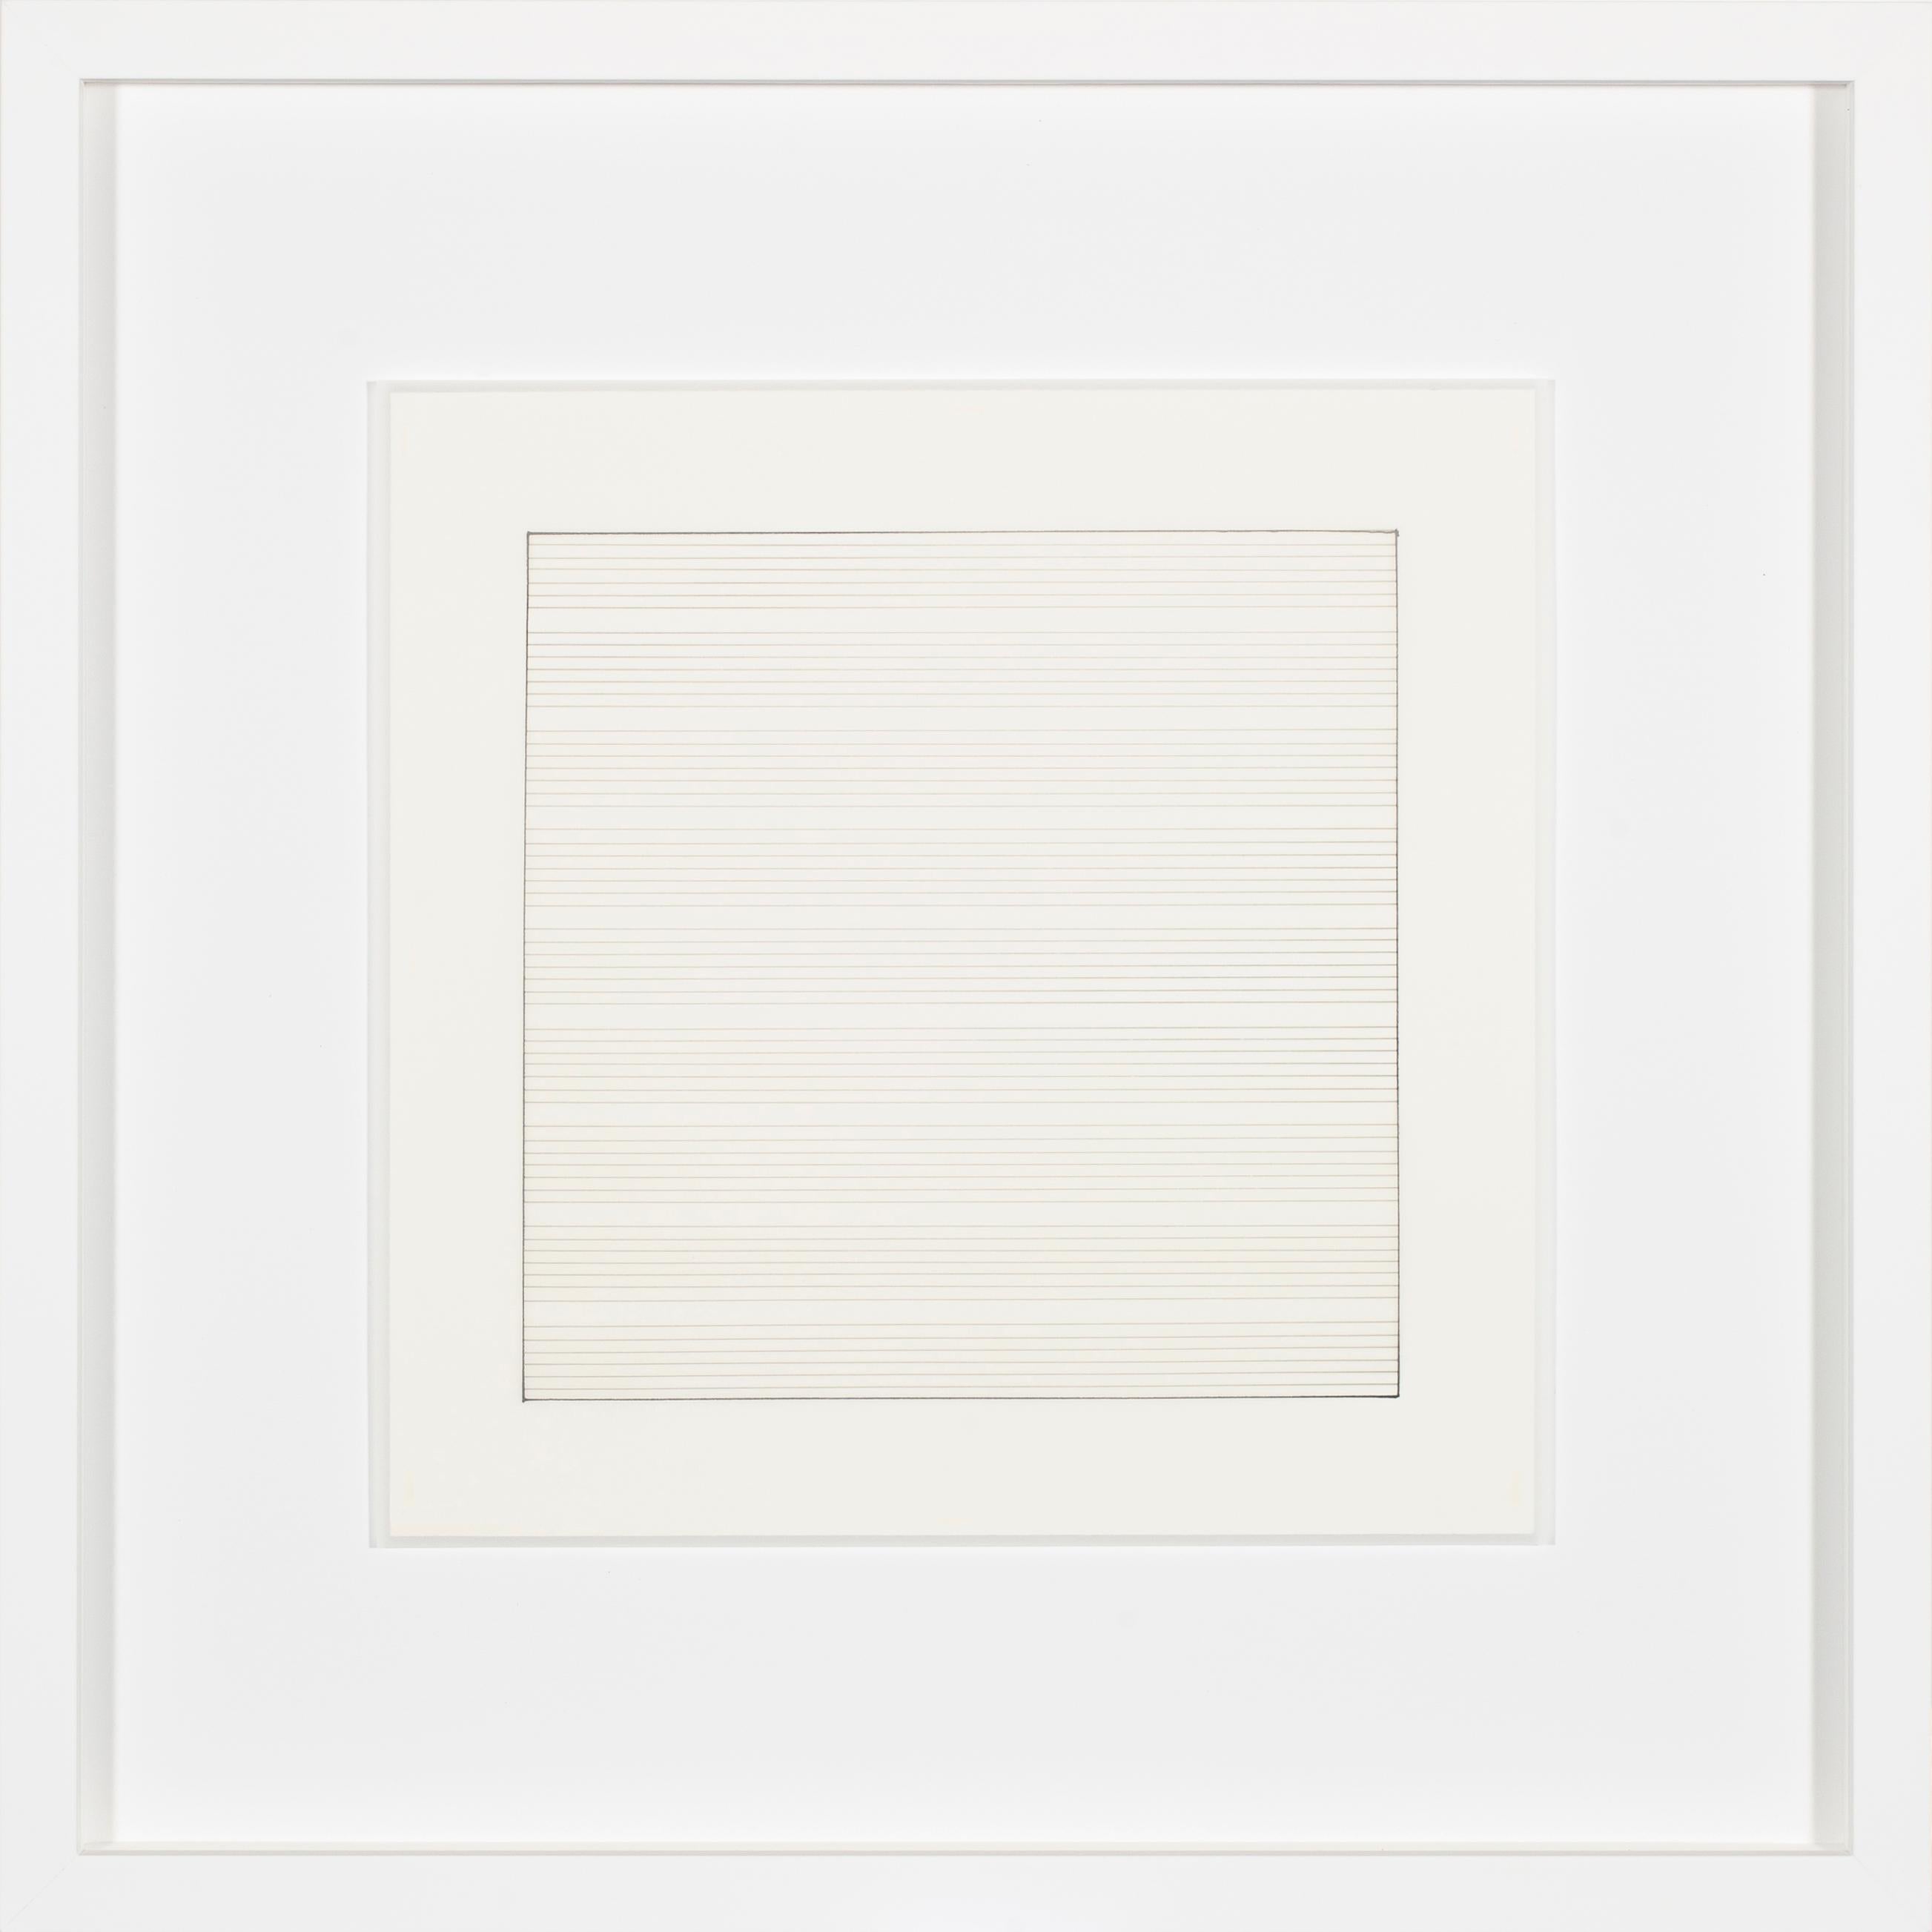 Agnes Martin Abstract Print - Untitled No. 4